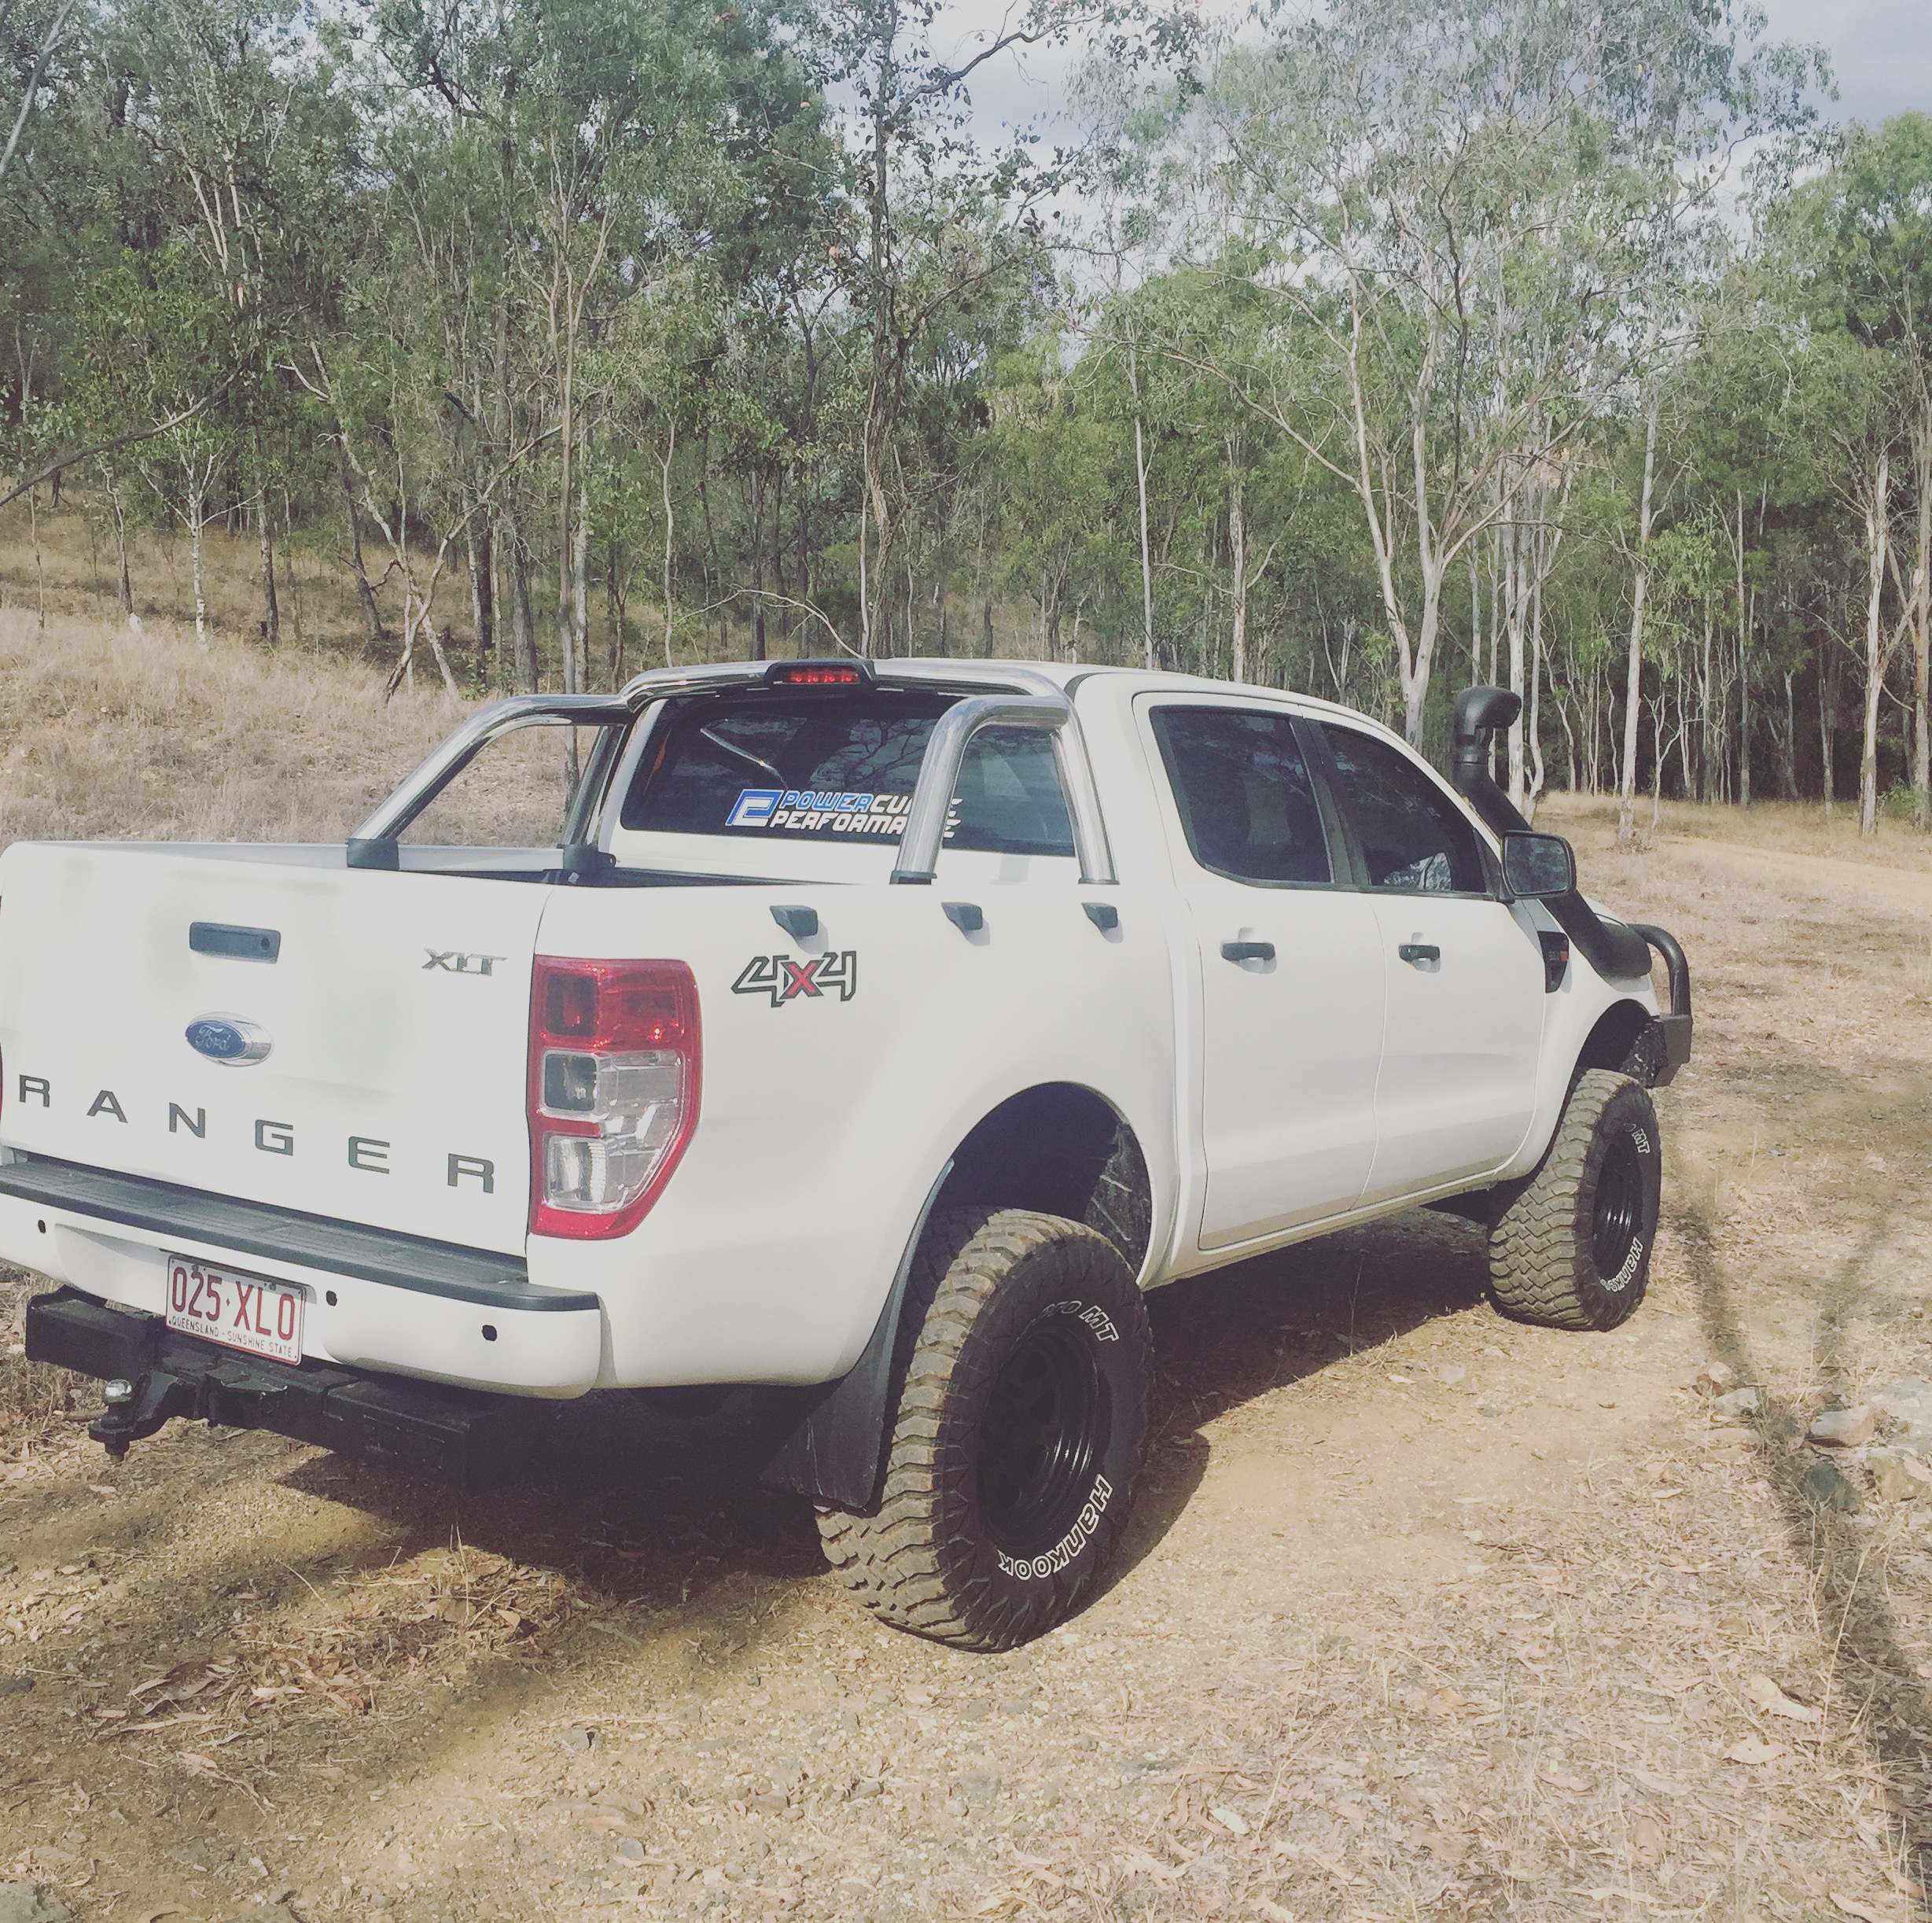 Cania George Big 4, Legendex Off-Road-Armour – Rock-Sliders, ECU tune, sunshine coast dyno tuning, power curve performance, Nambour mechanical, 4wd upgrades modification, turbo upgrades, injector upgrades, duramax conversions, nissan tune, ECU Tune, Diesel Tune, central queensland, monto, biloela, ford ranger. 2.2, towing upgrades, 200 series project, 